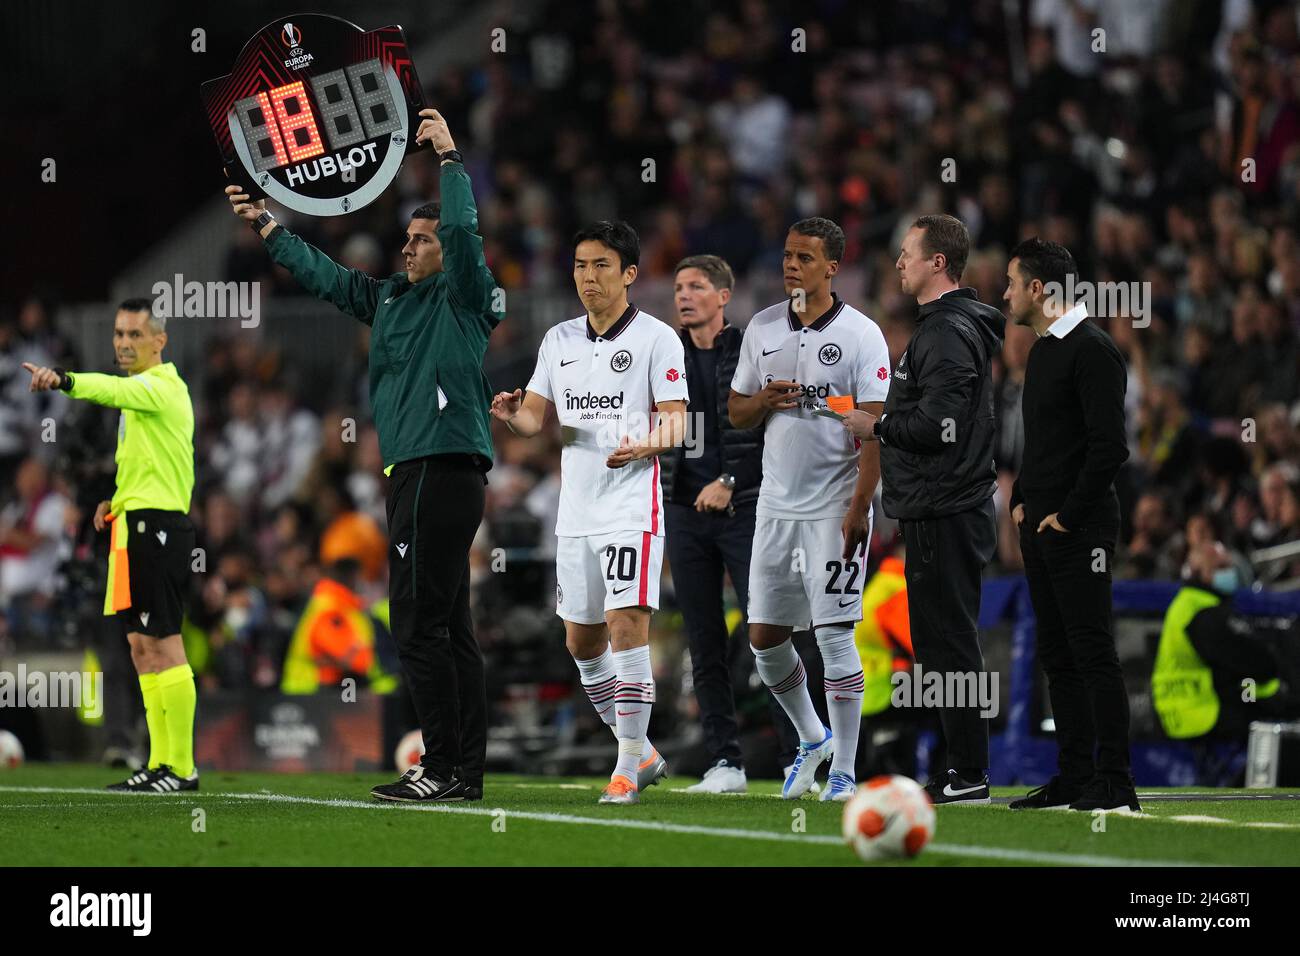 Timothy Chandler and Makoto Hasebe of Eintracht Frankfurt during the UEFA Europa League match, Quarter Final, Second Leg, between FC Barcelona and Eintracht Frankfurt played at Camp Nou Stadium on April 14, 2022 in Barcelona, Spain. (Photo by Colas Buera / PRESSINPHOTO) Stock Photo